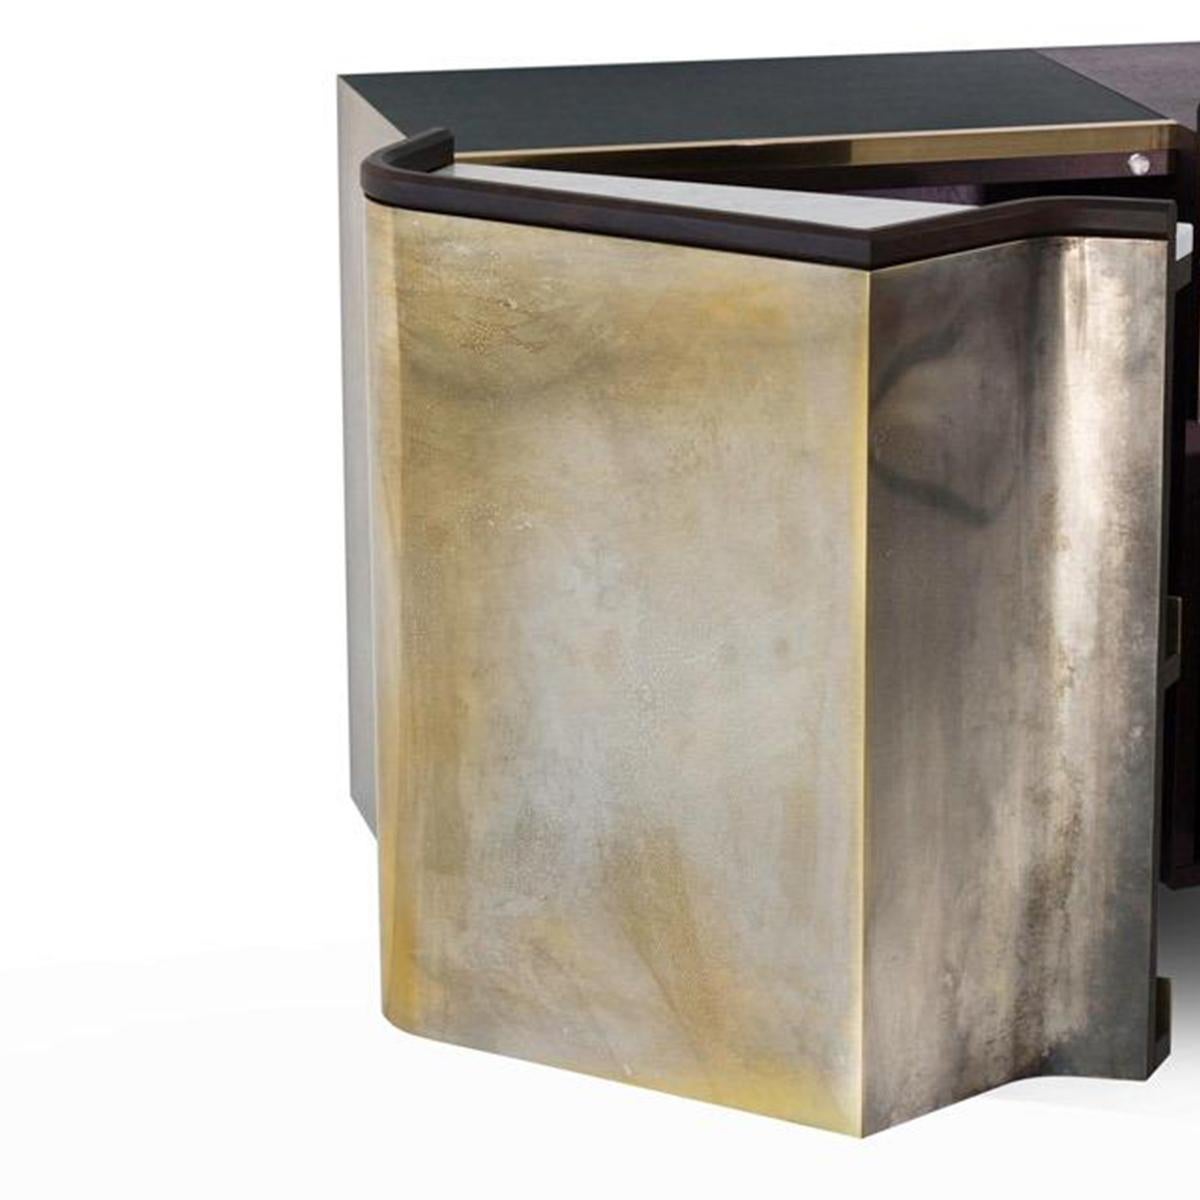 Polished Silvered Brass Faced Console Sideboard with Marble, Leather and Wood Finishes